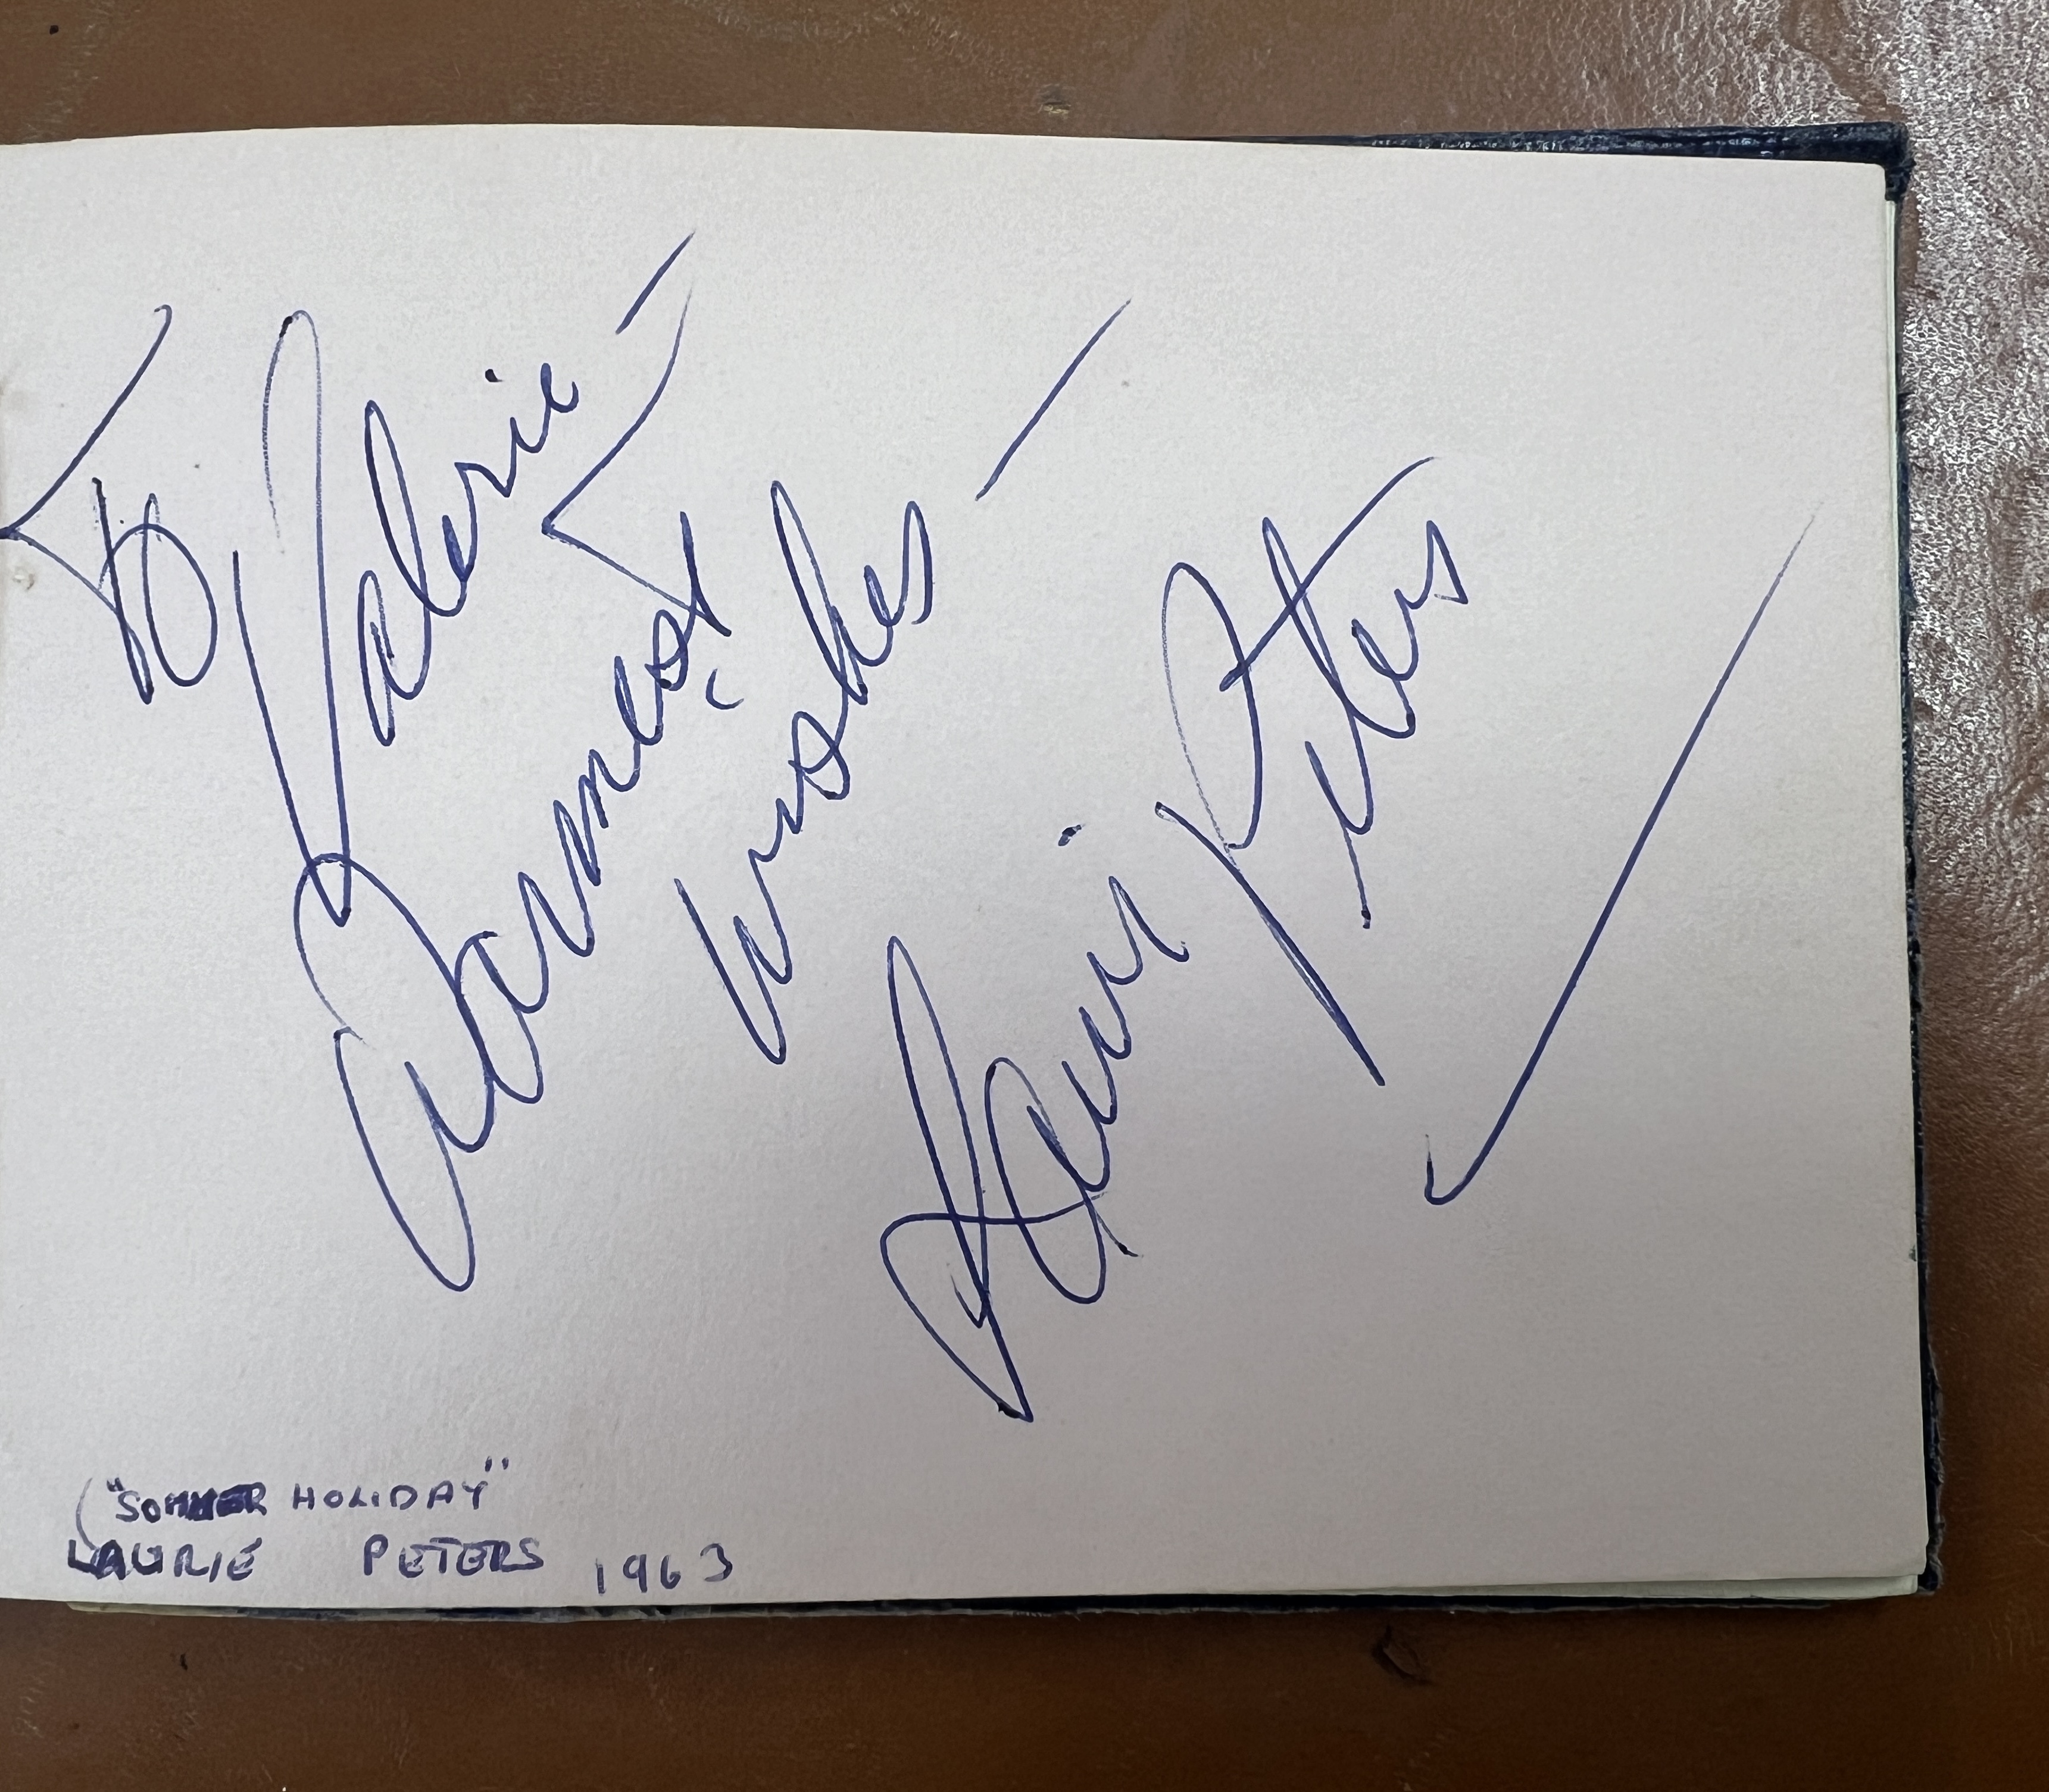 A 1960's autograph album containing autographs of various celebrities including Cliff Richard - Image 32 of 37